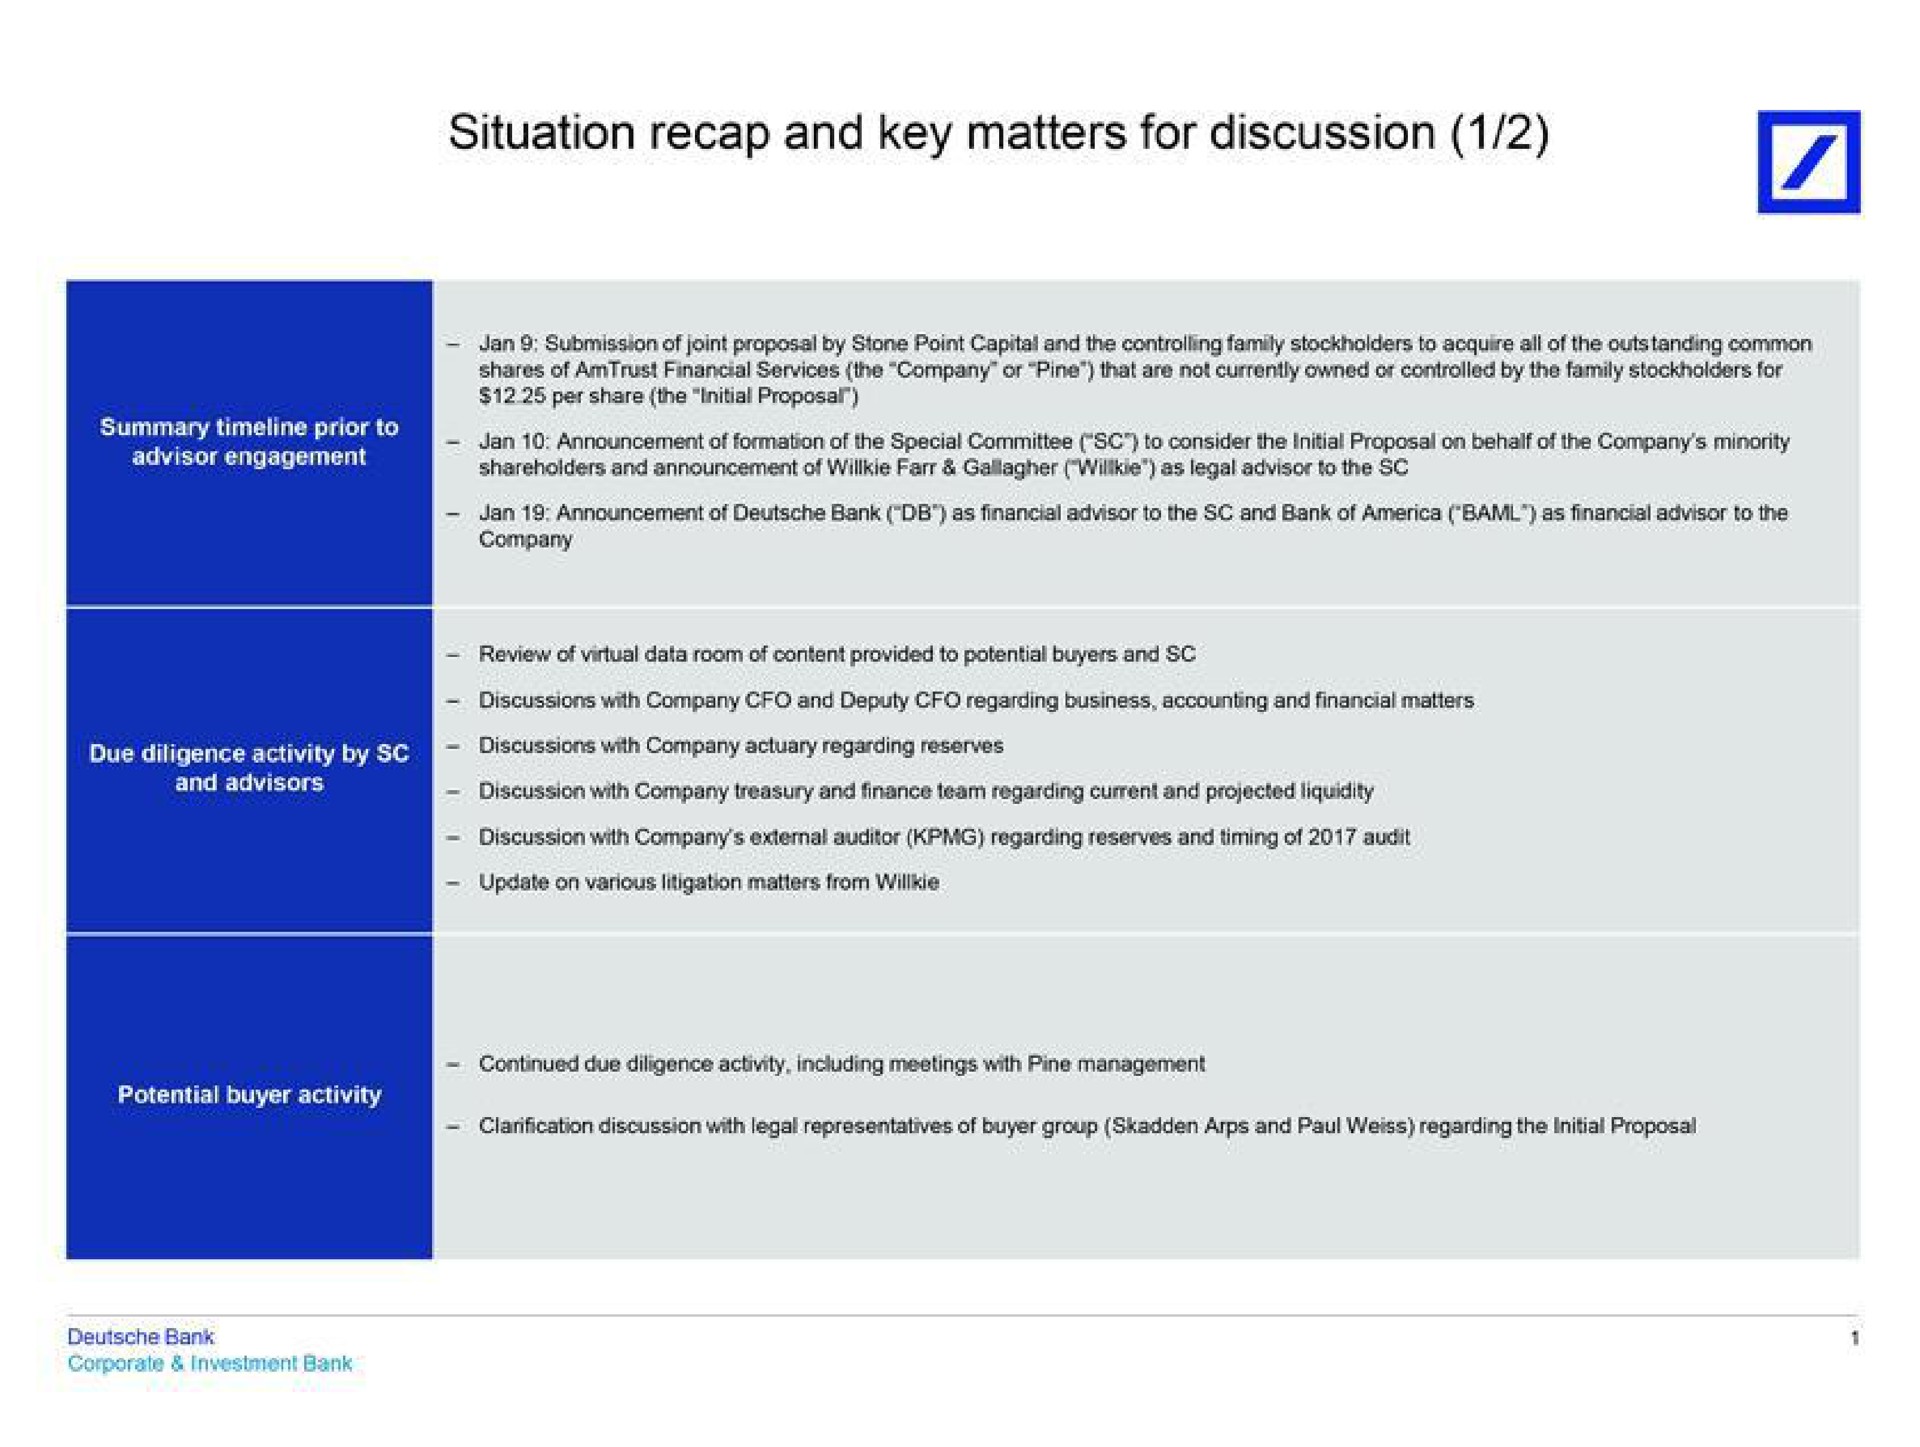 situation recap and key matters for discussion | Deutsche Bank